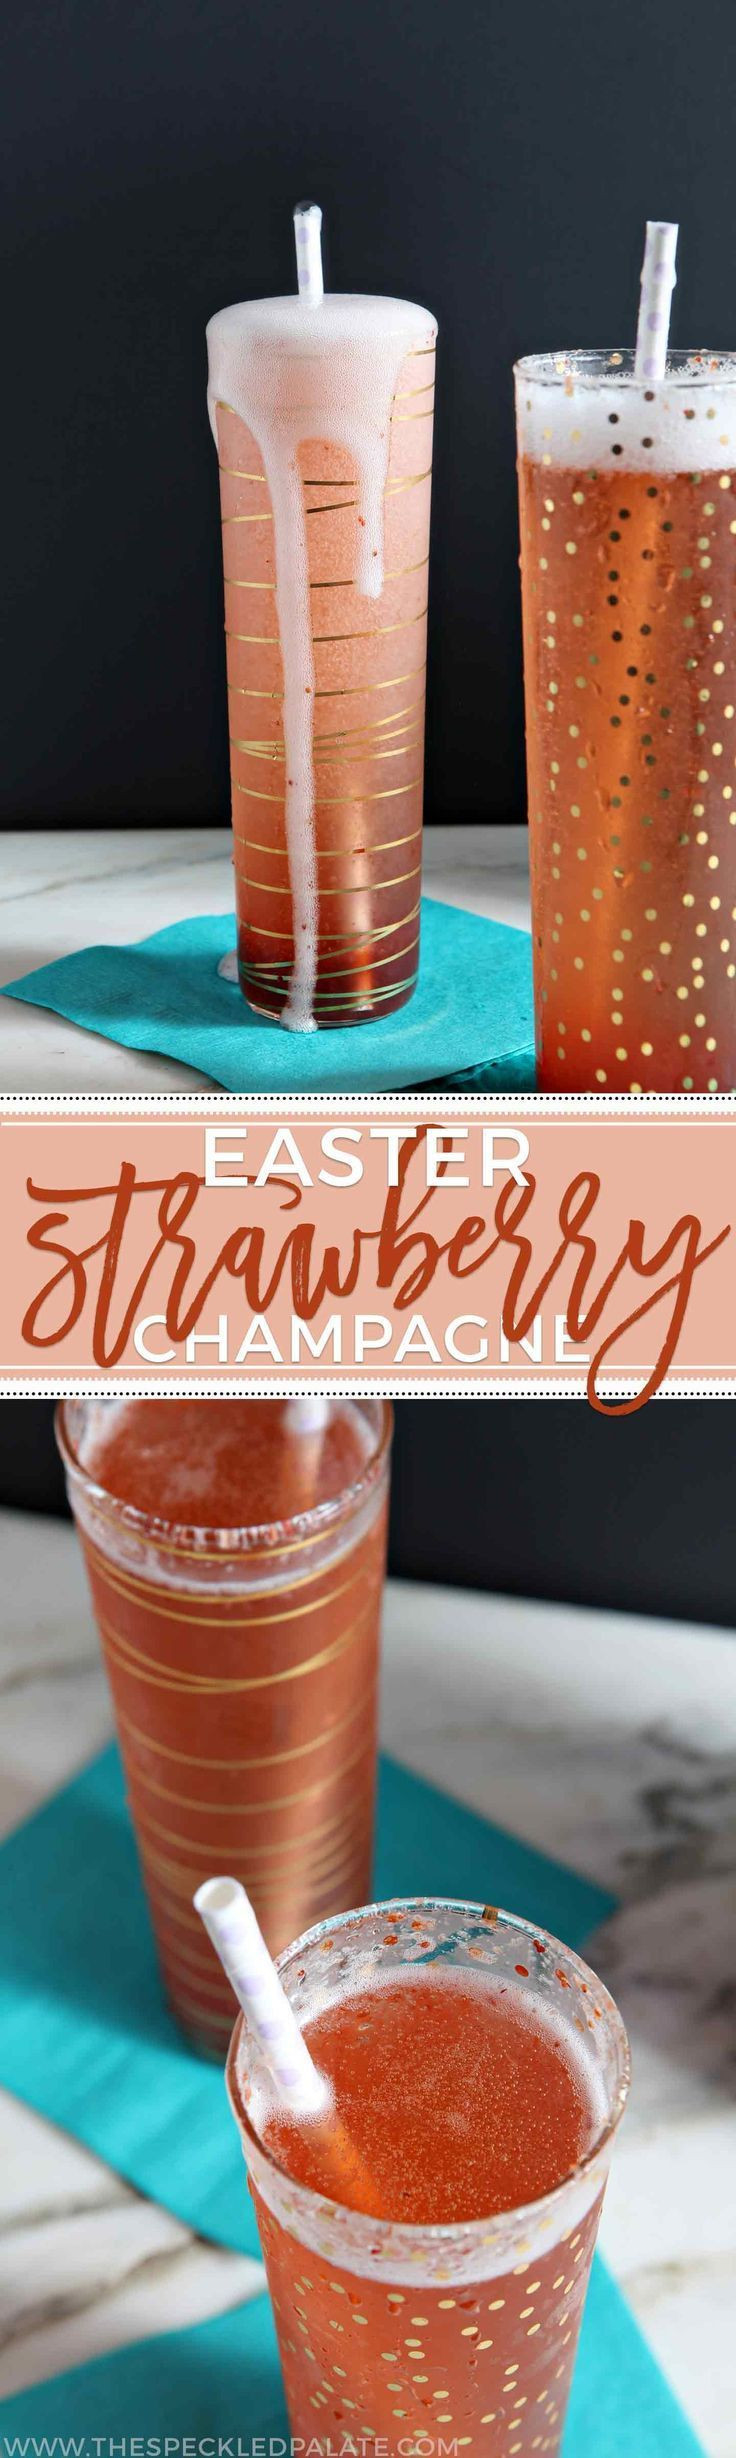 Easter Punch Recipe
 Strawberry Champagne Recipe